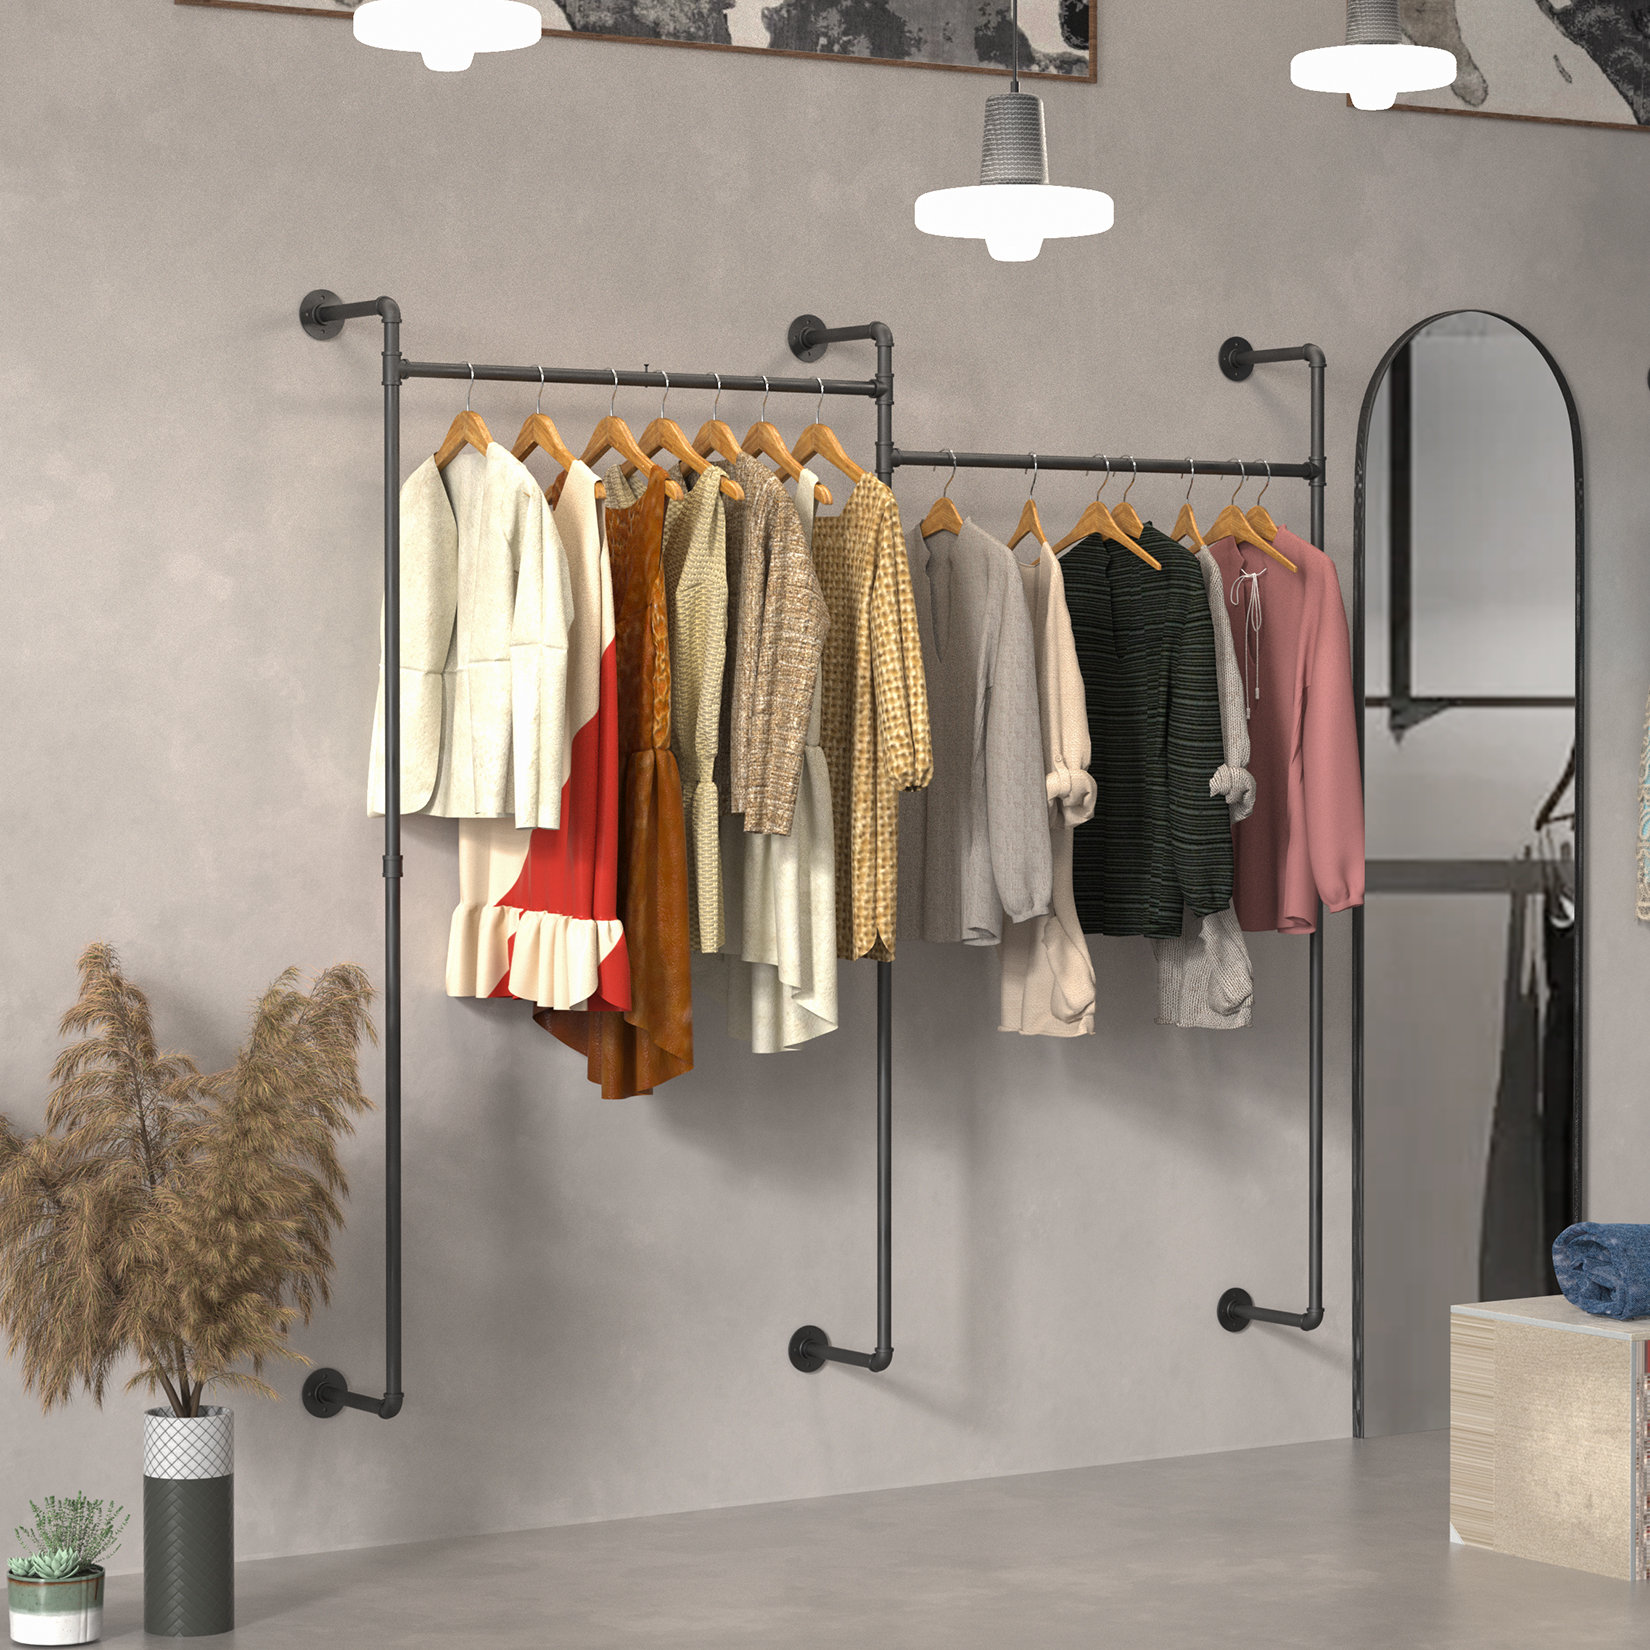 Adein 804 Metal Wall Mounted Clothes Rack 